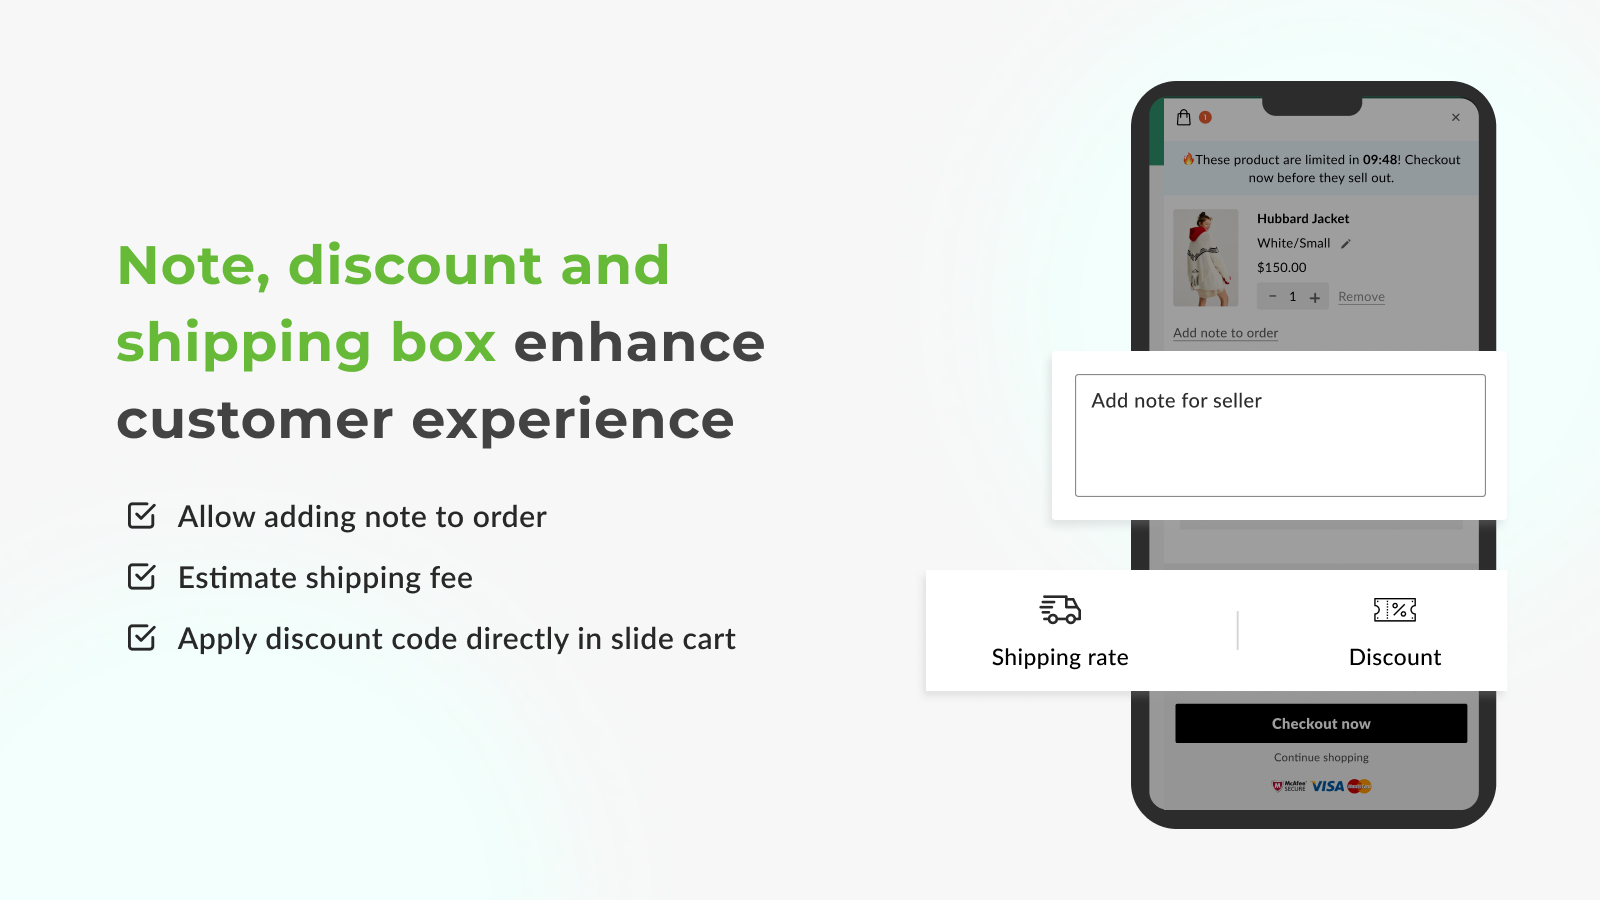 Note, discount and shipping box enhance customer experience